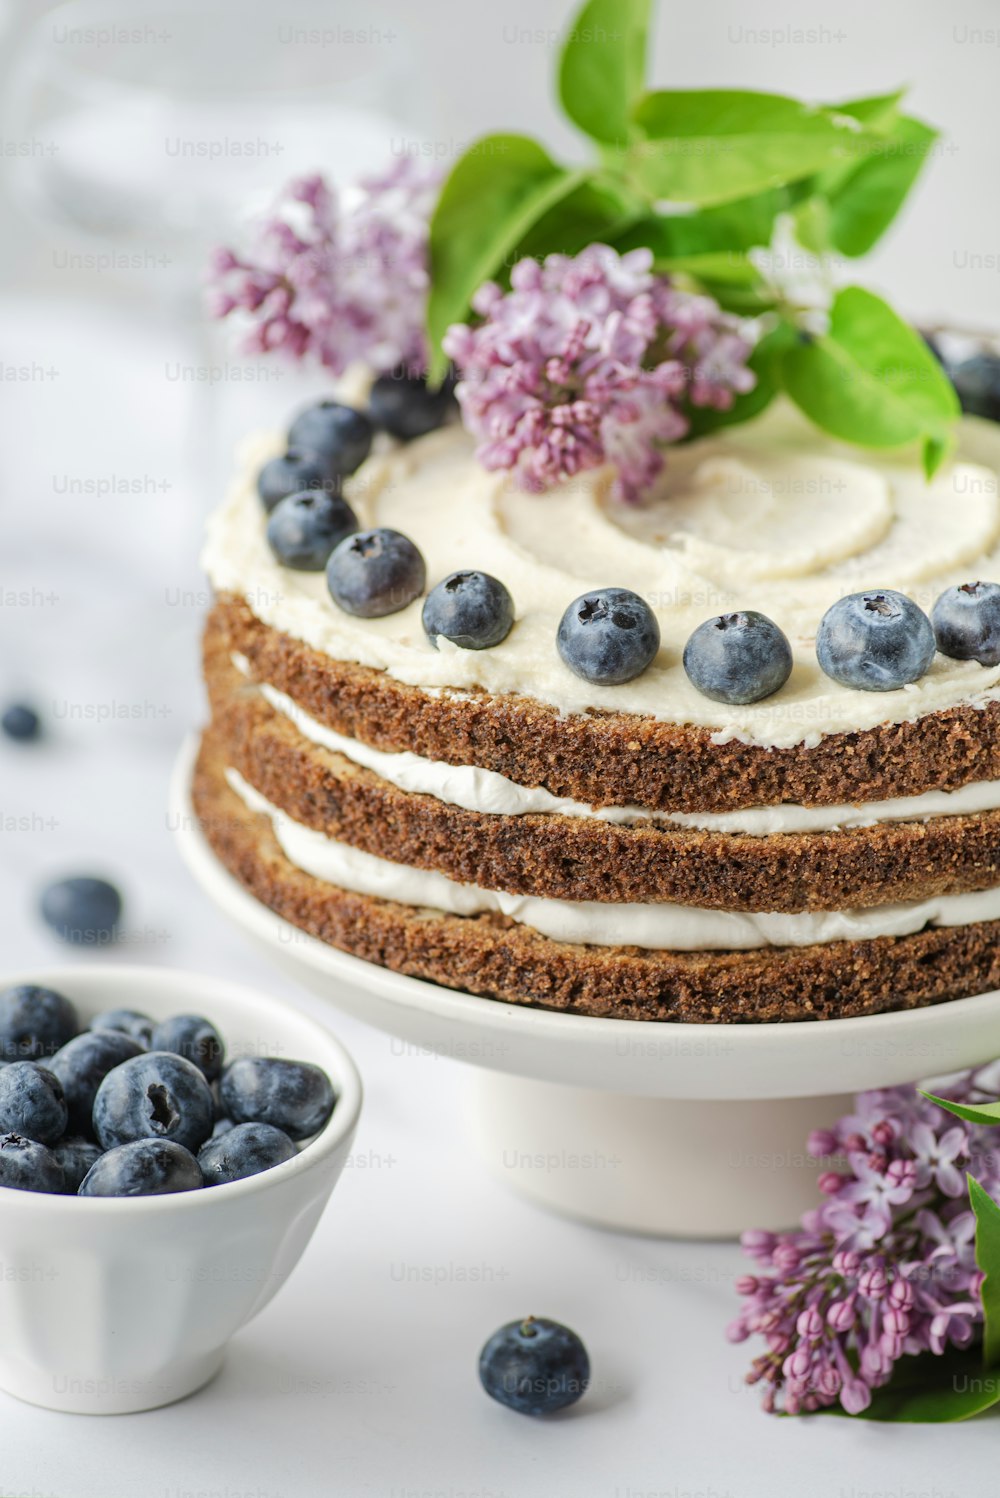 a close up of a cake on a plate with blueberries